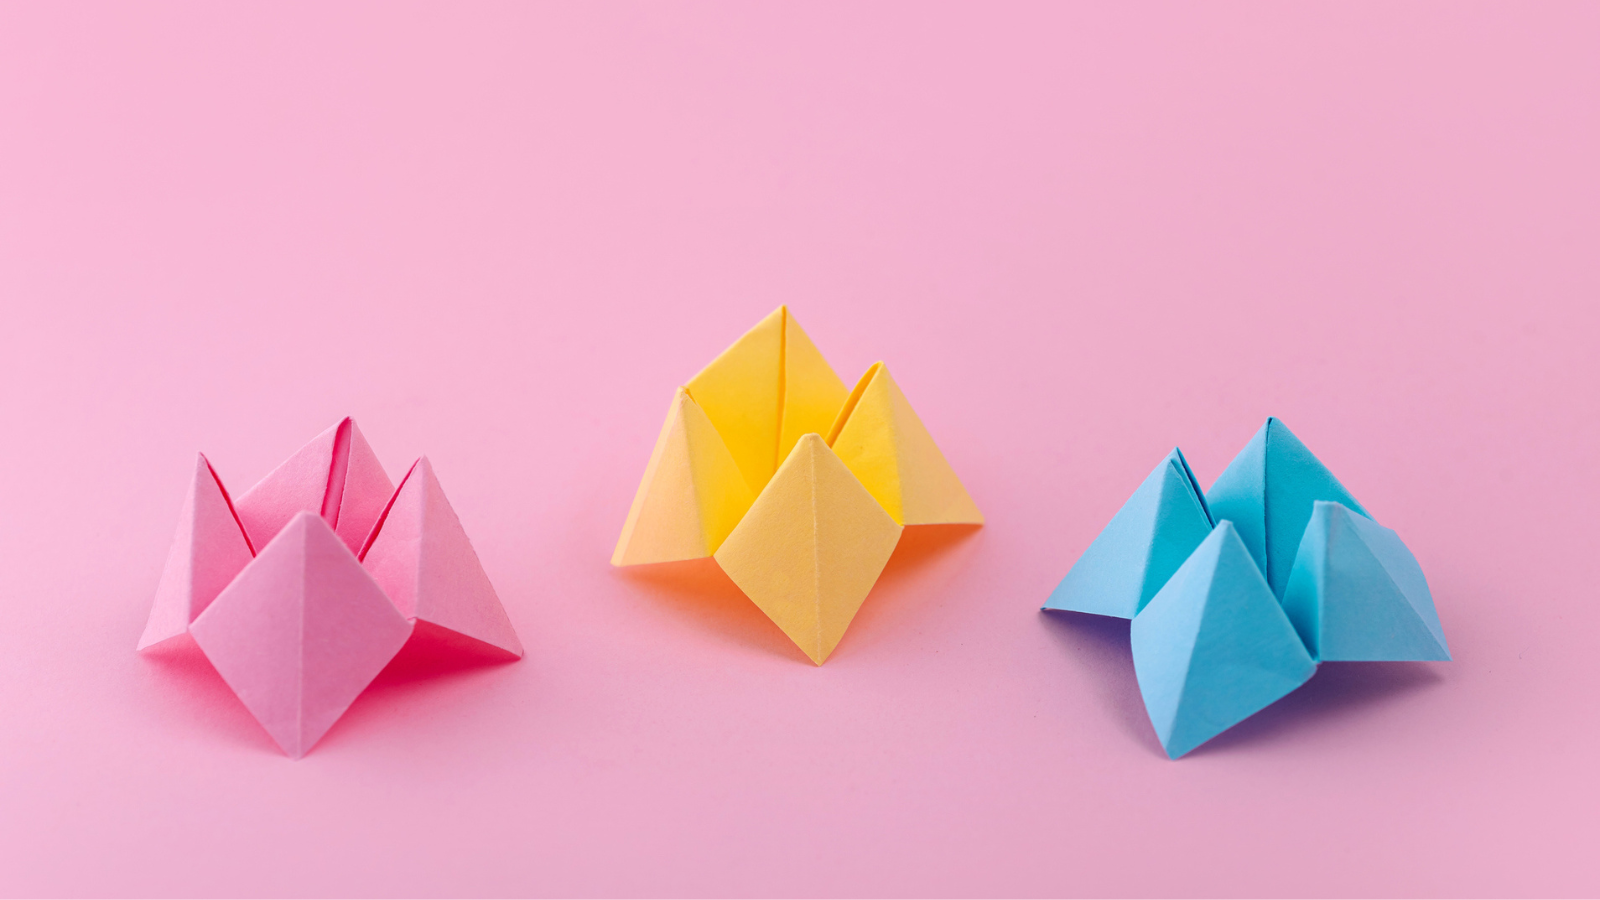 Three coloured paper fortune tellers (pink, yellow and blue), on a pink background.